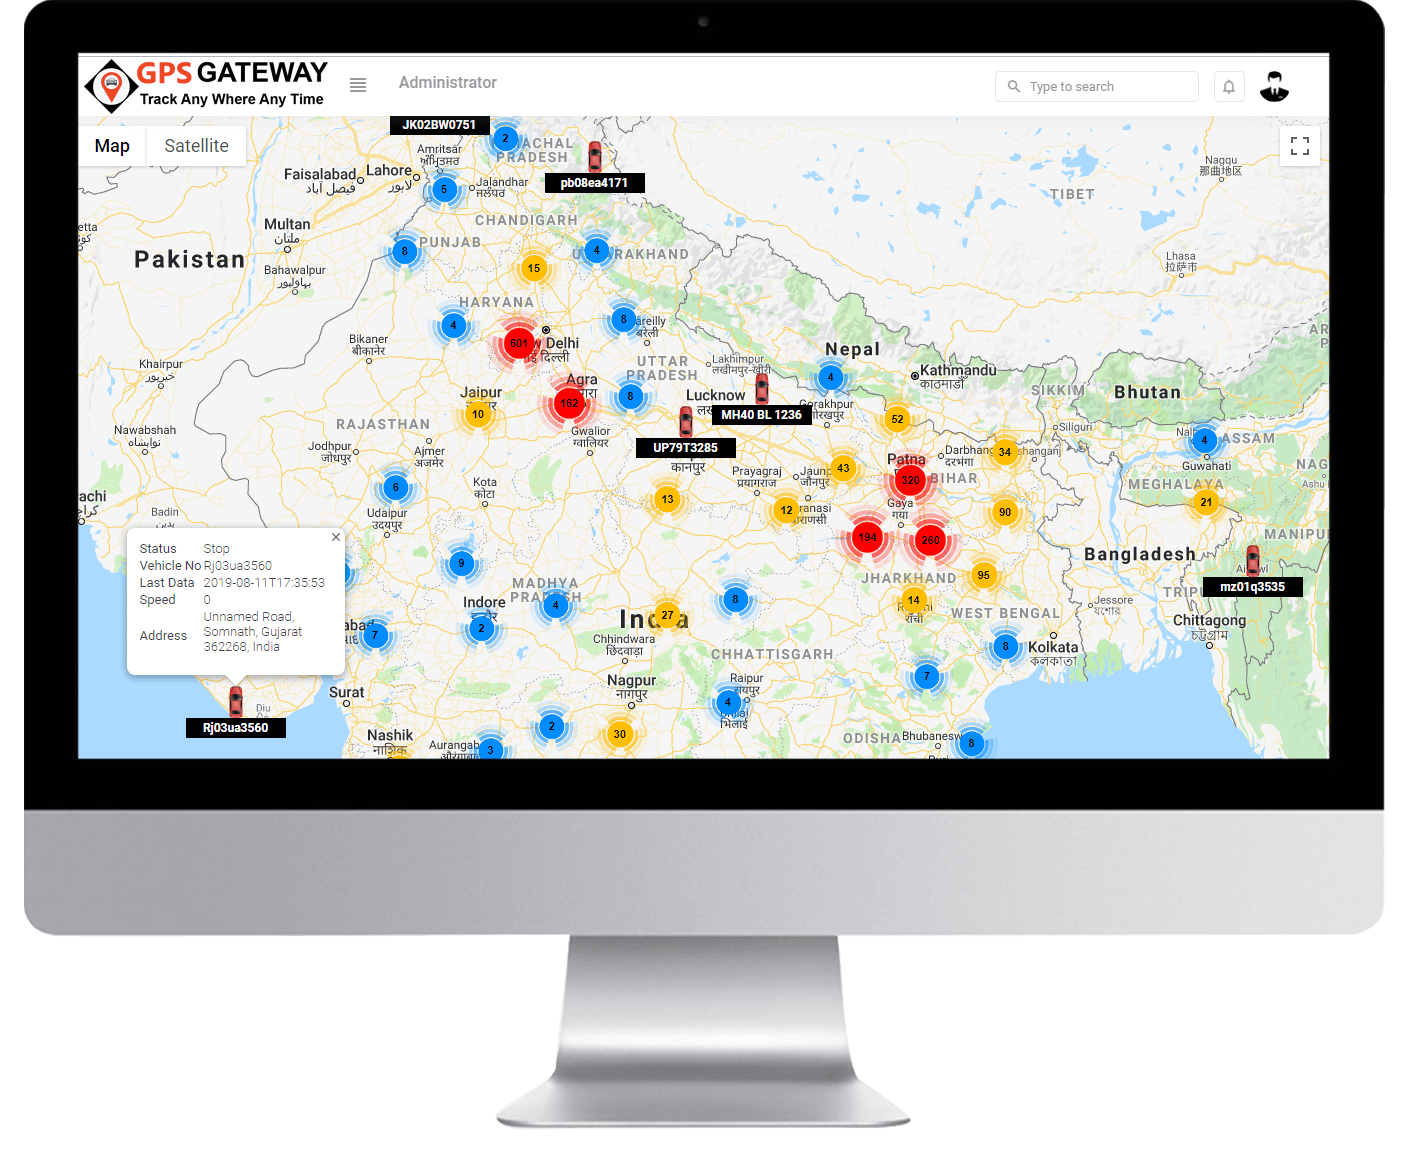 sales Vehicle Tracking Software, Vehicle gps tracking app, Vehicle gps tracking system, Vehicle gps tracking app android